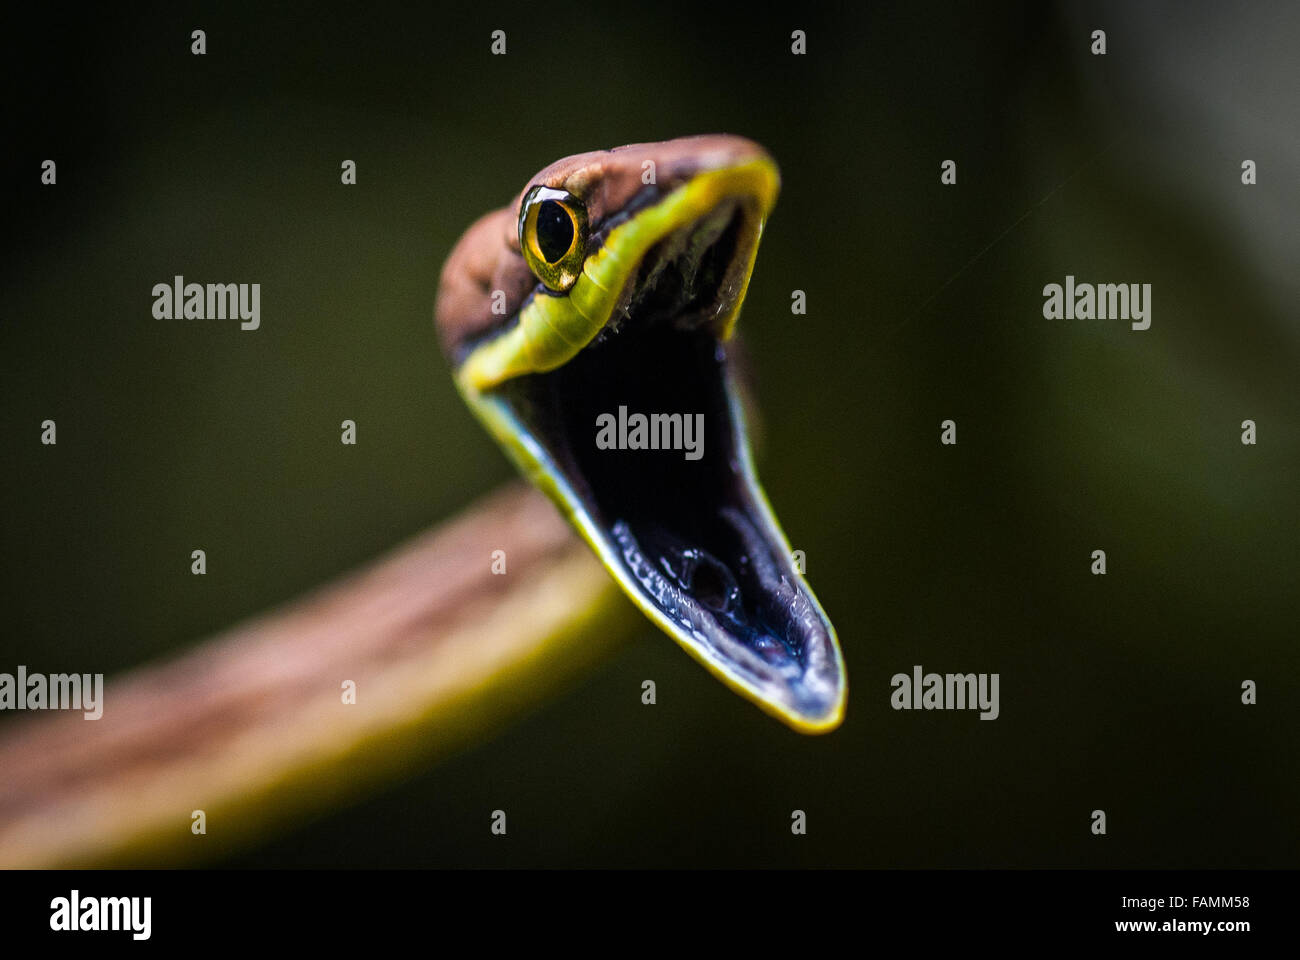 A closeup of the gaping-mouth threat posture of an agitated Brown Vine Snake. Stock Photo